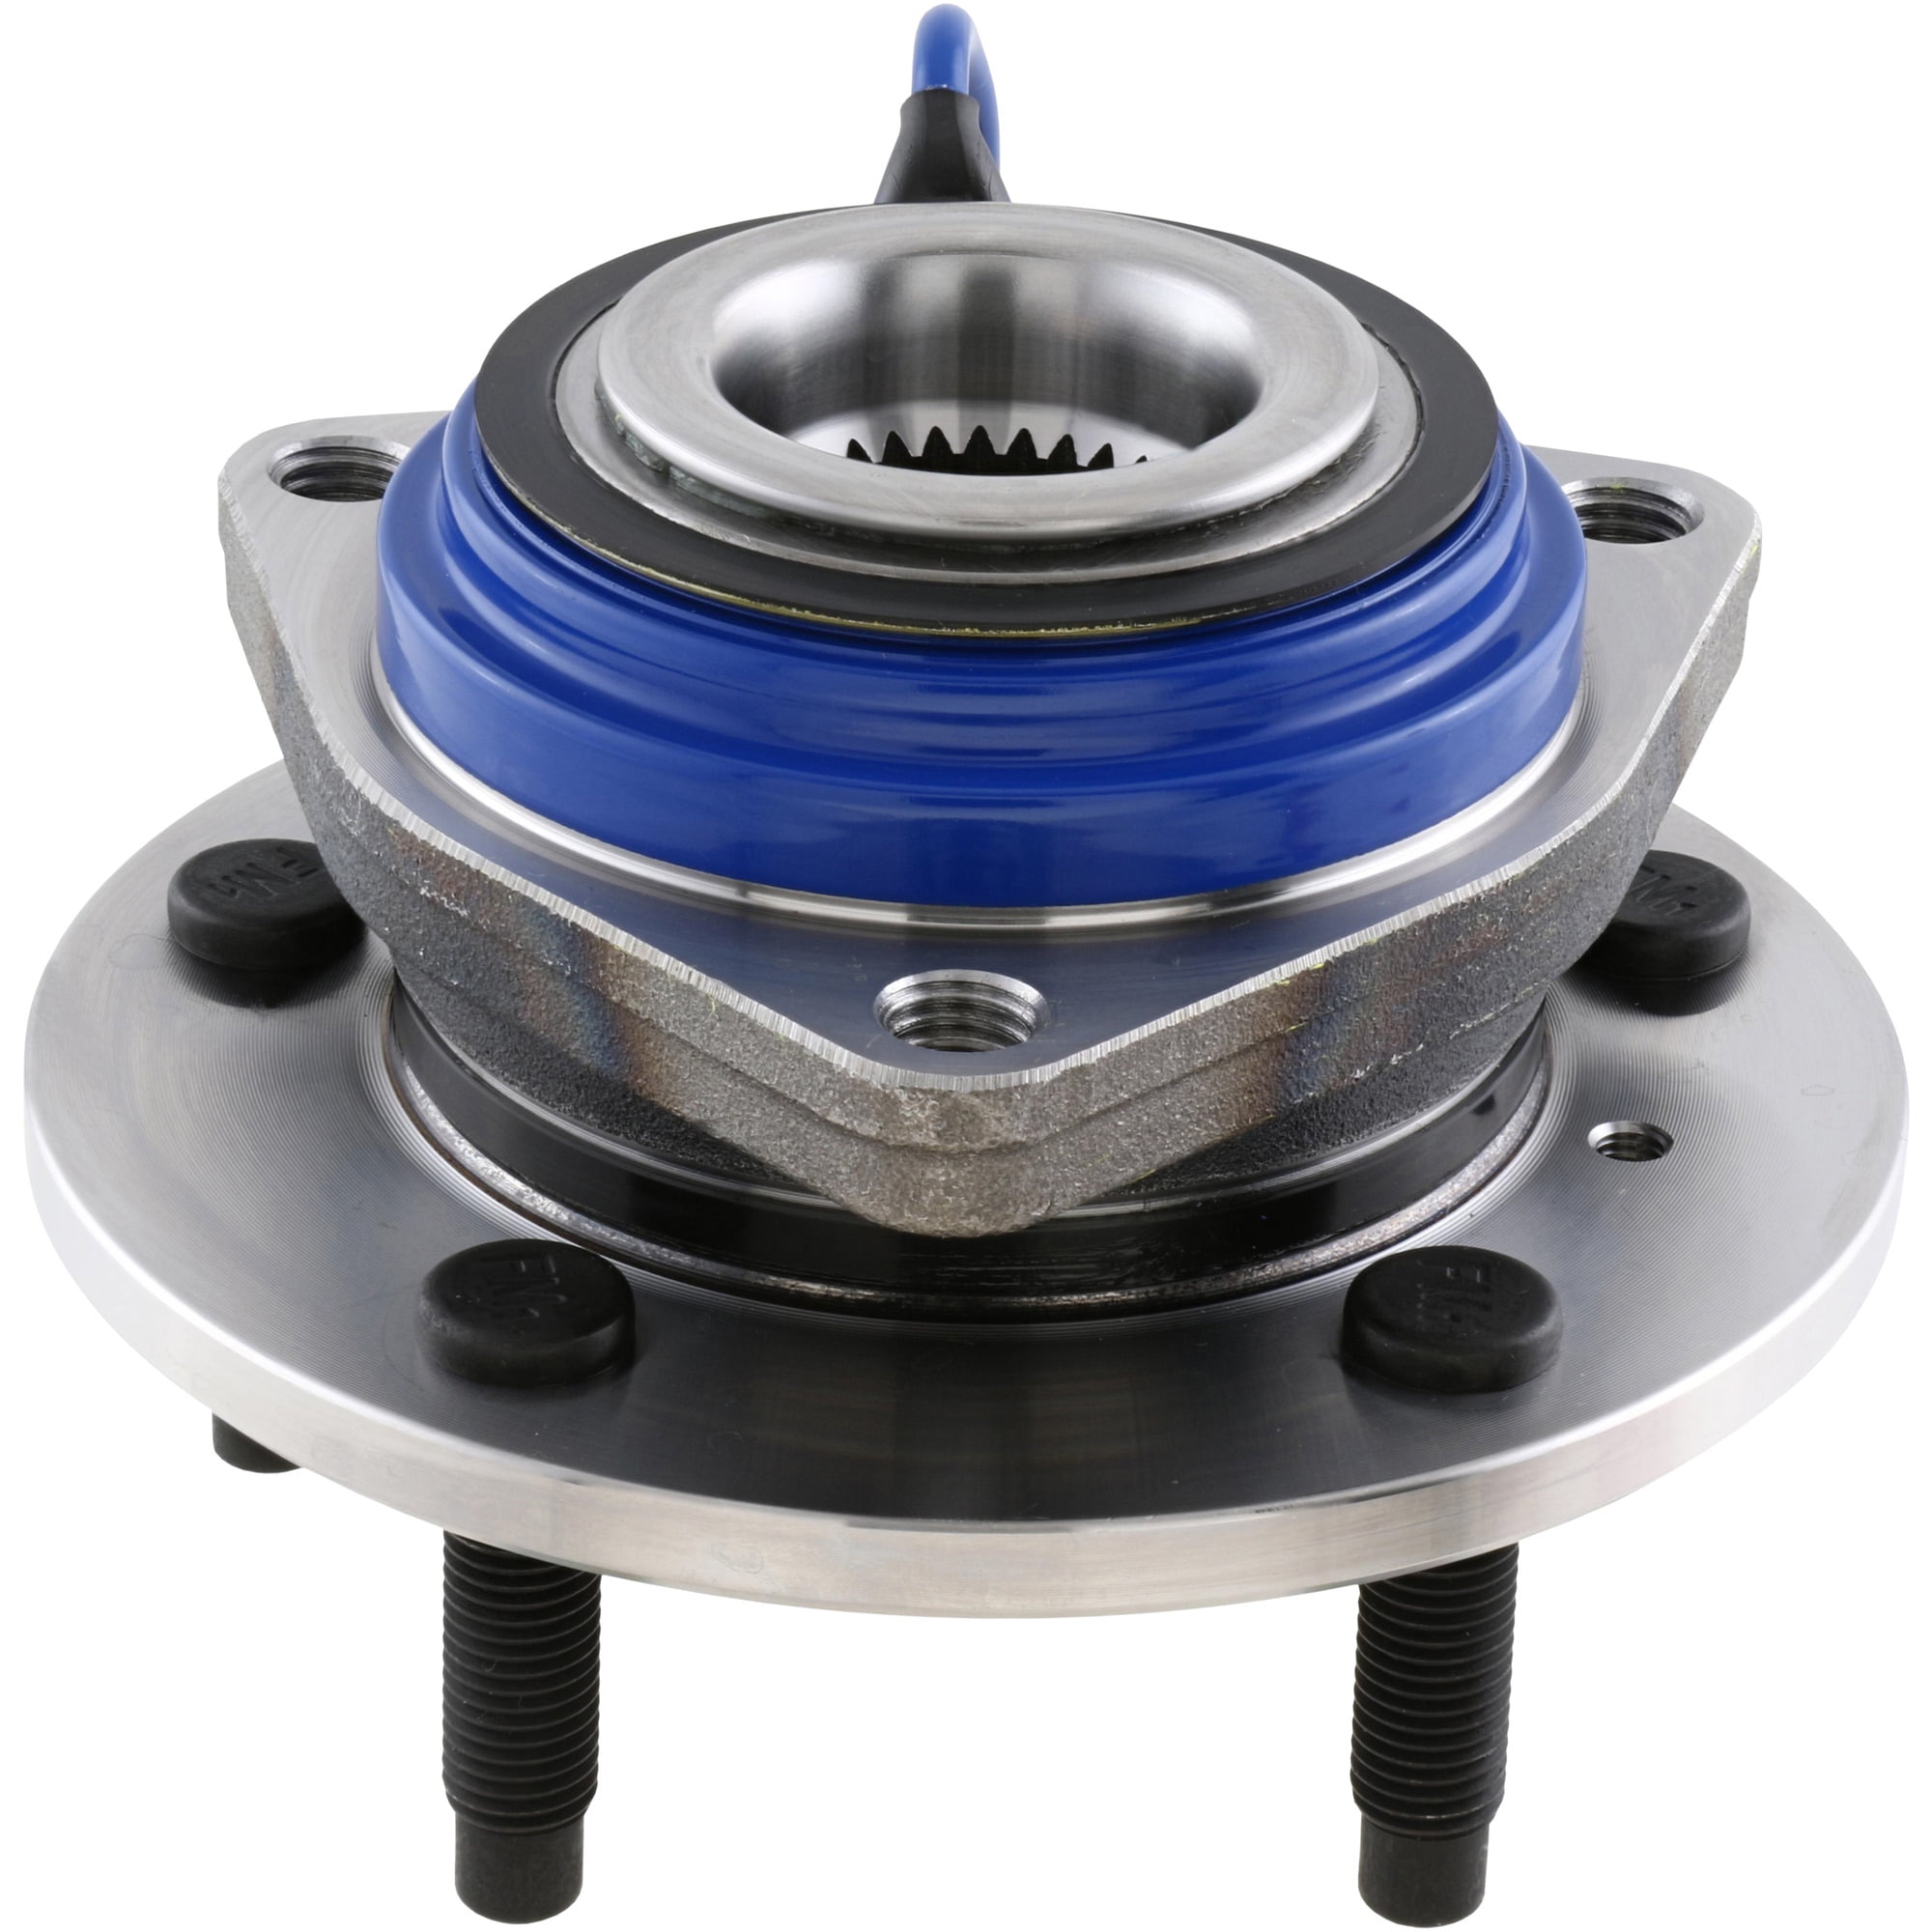 OCPTY Front Wheel Hub and Bearing Assembly Replacement fit for Aurora Impala 5 Lug W/ABS 513179 X 2 Bonnevile Century